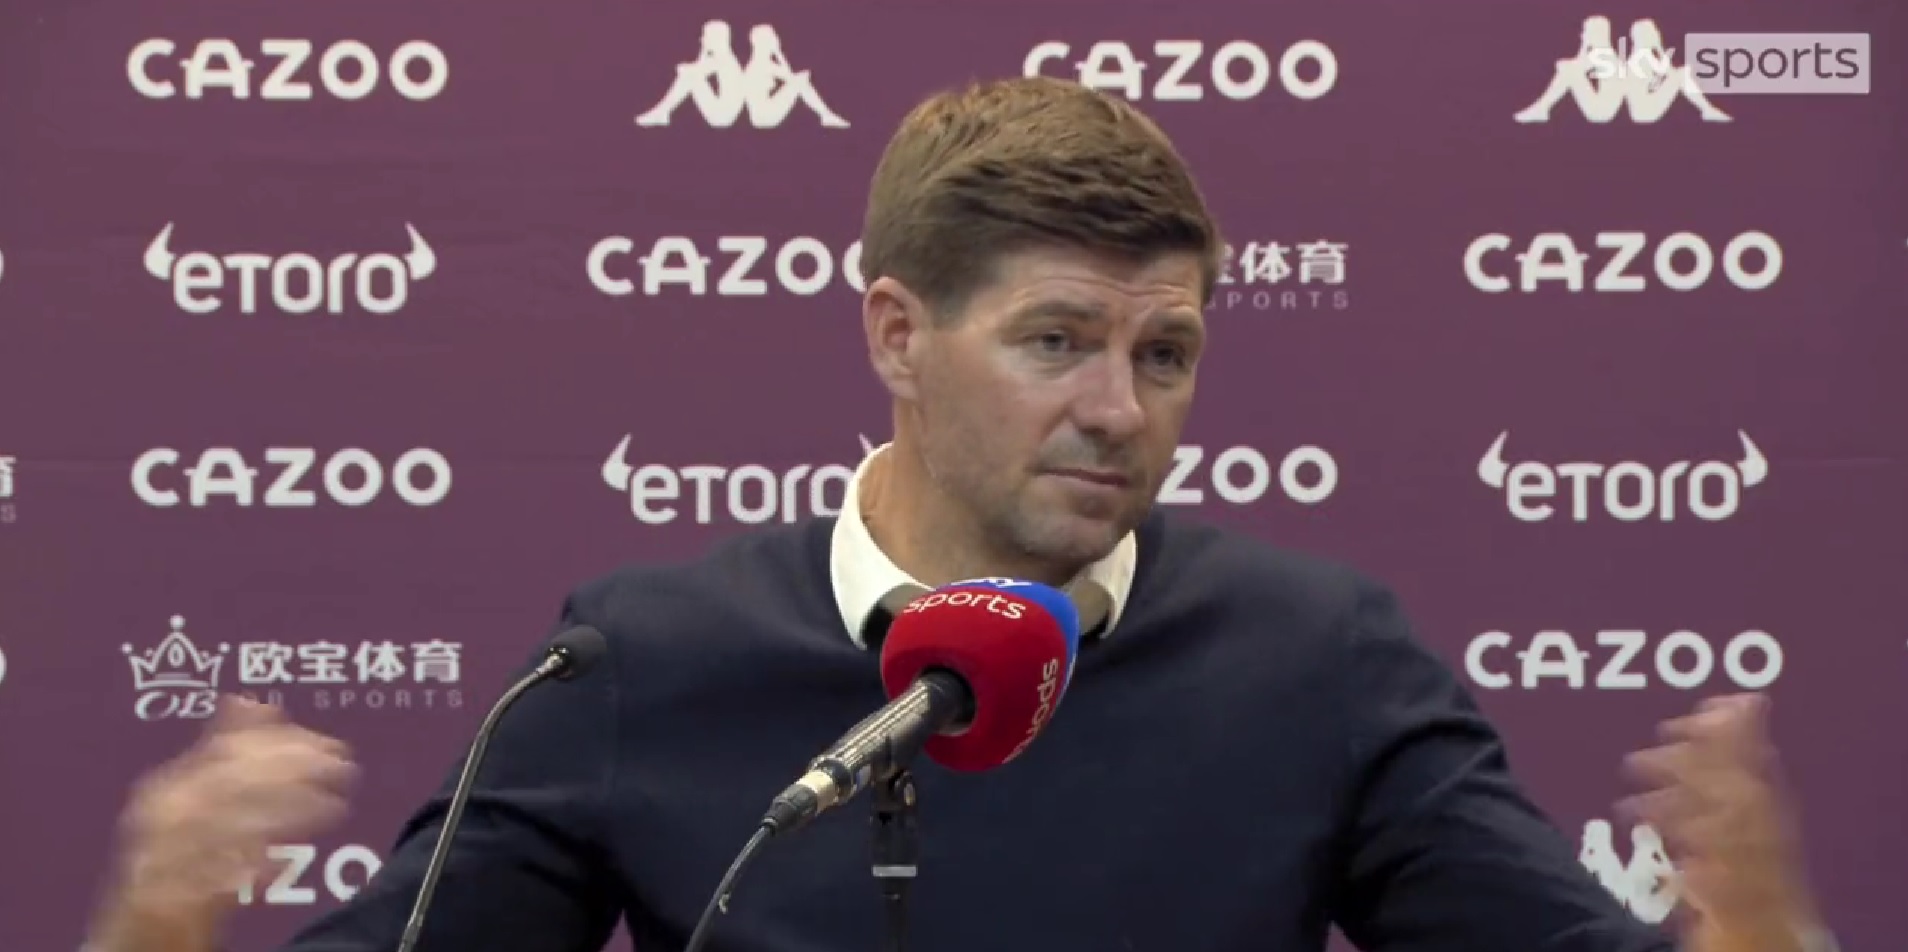 (Video) ‘If that helps Liverpool… fantastic’ – Gerrard challenges attacks on his integrity ahead of Manchester City tie